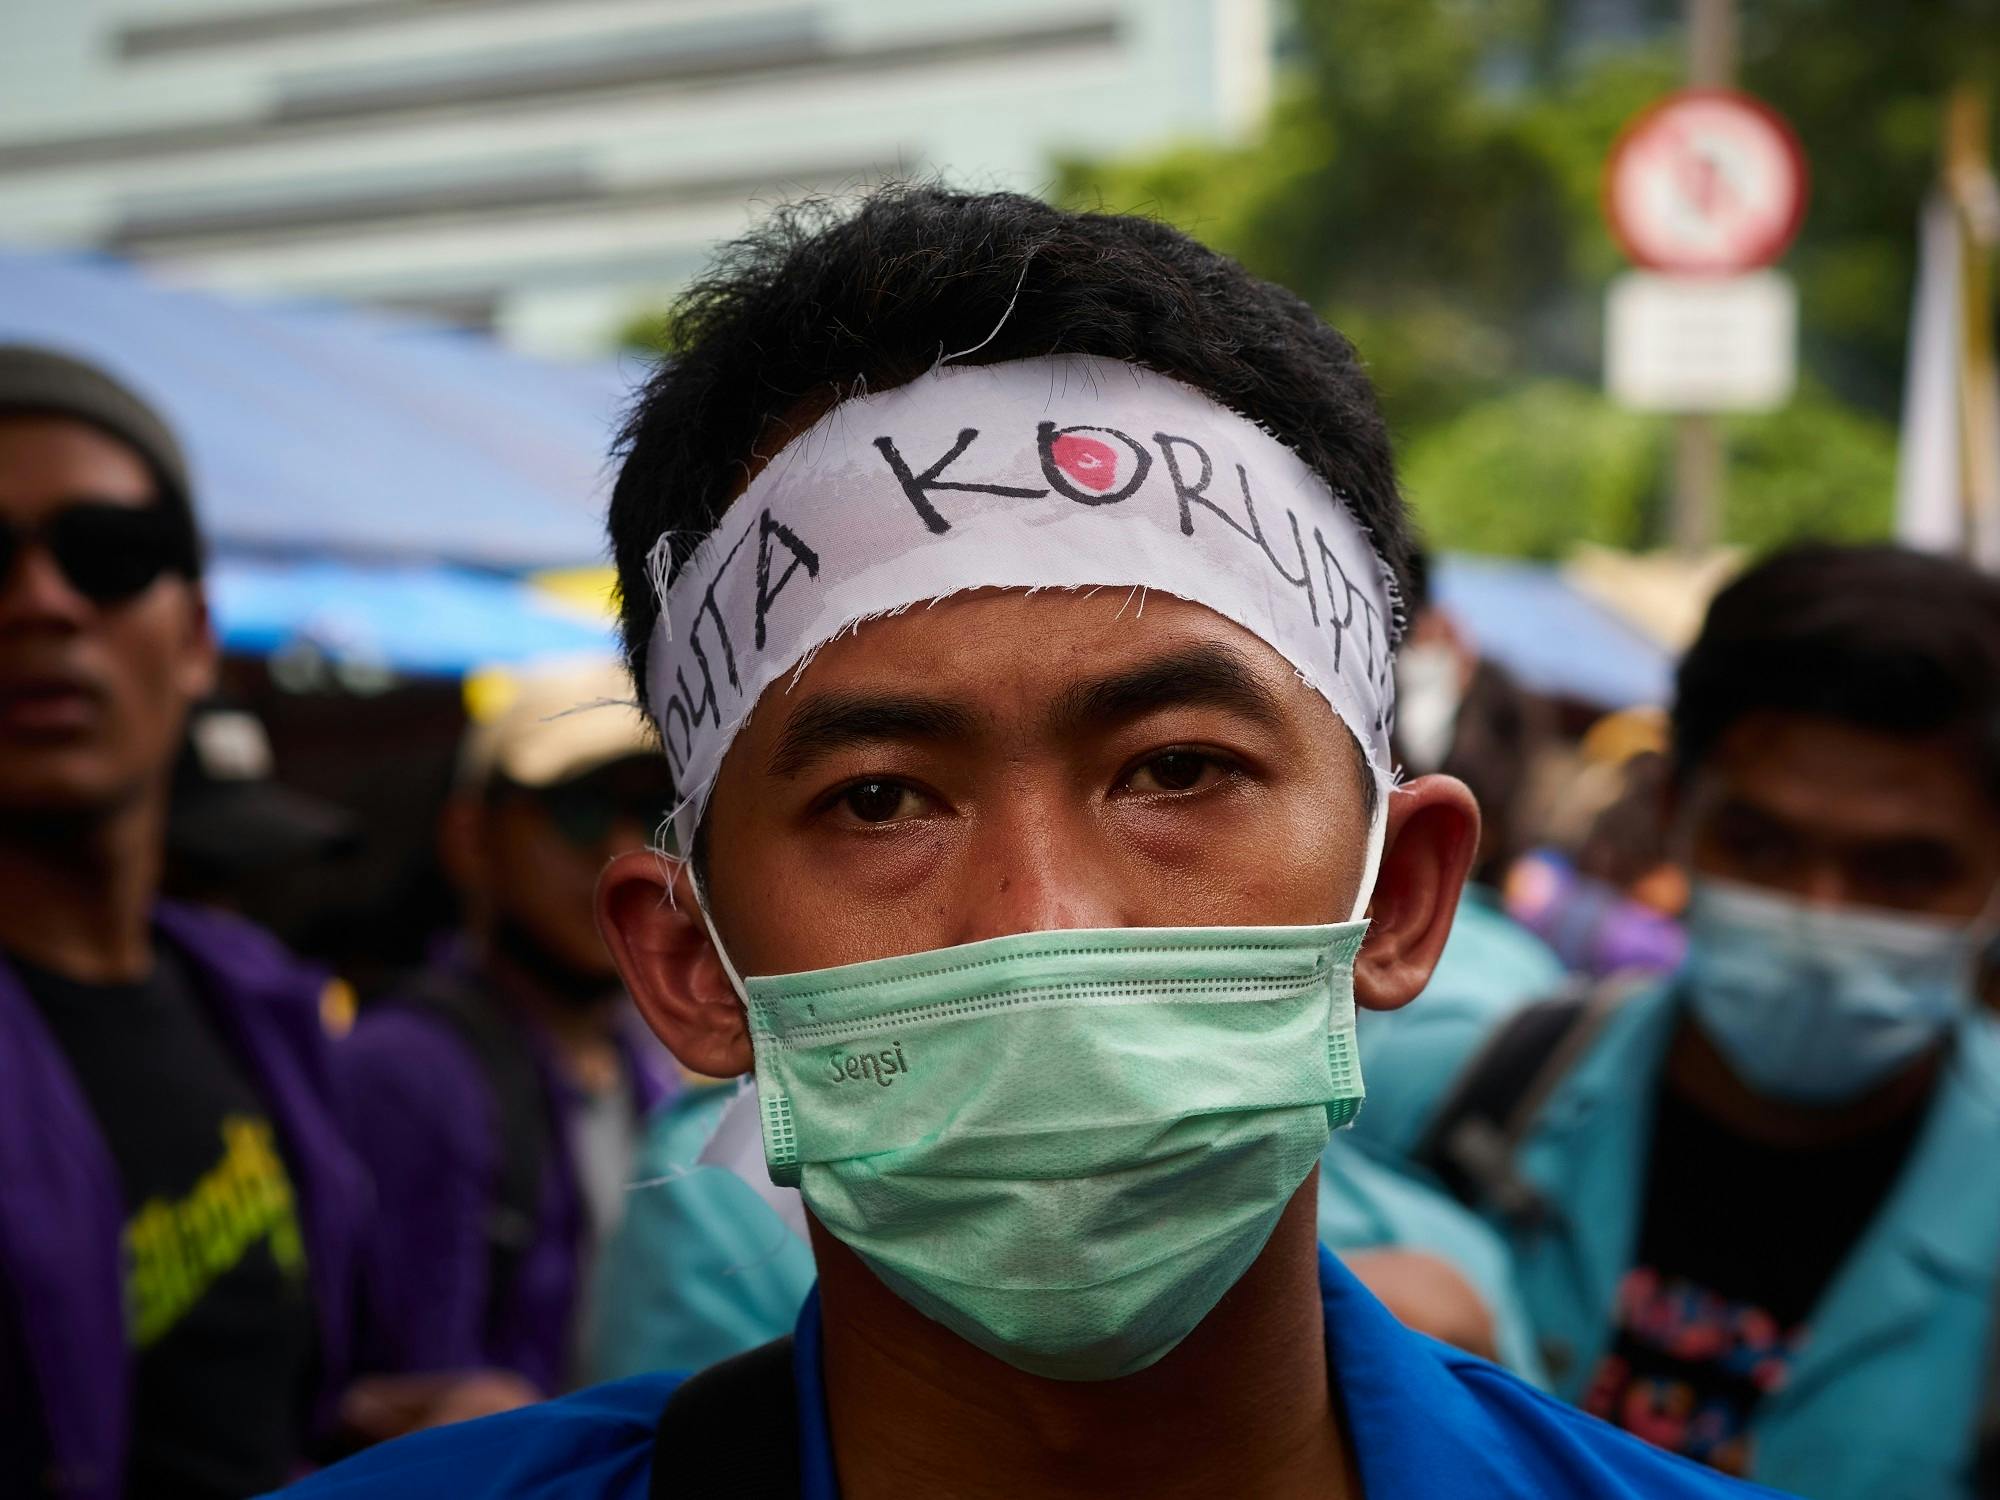 A man wearing a green mask looks right at the camera during a protest